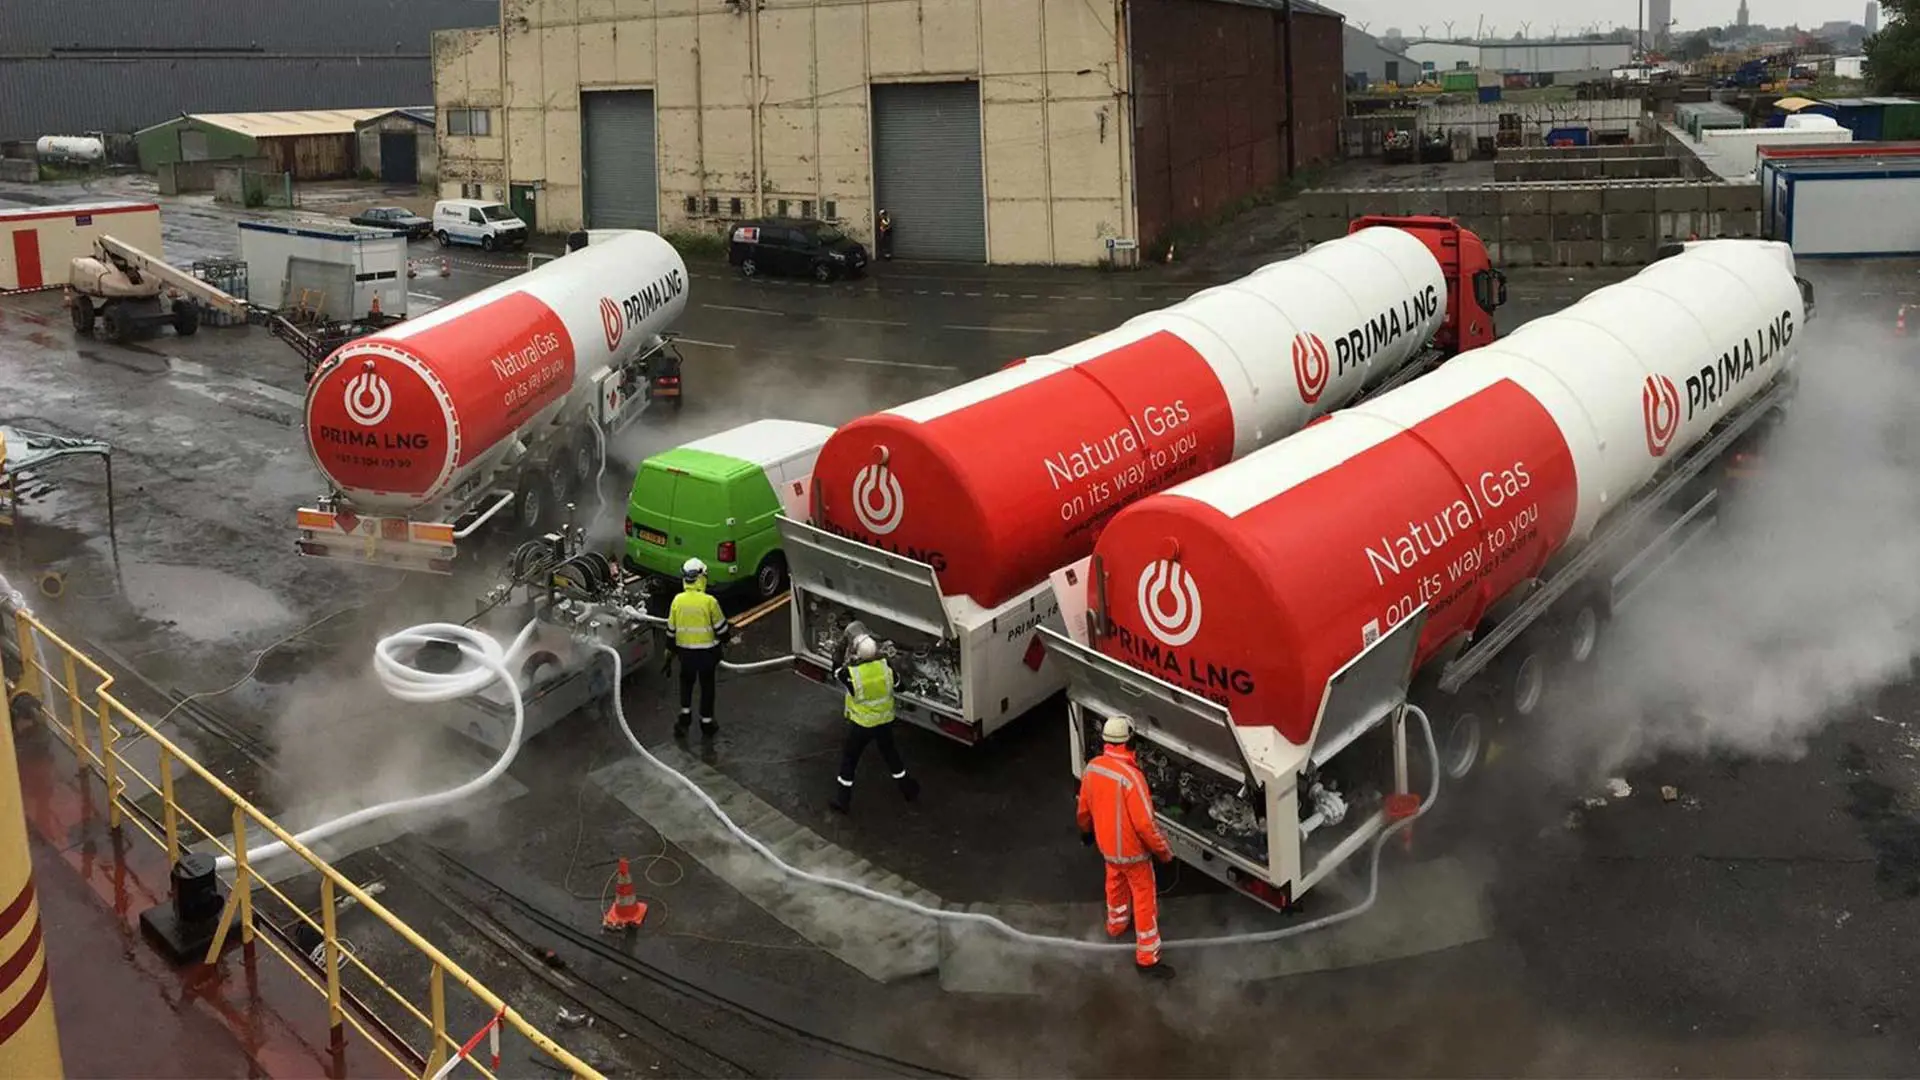 Three LNG trucks delivering fuel simultaneously using the trailer-mounted manifold.